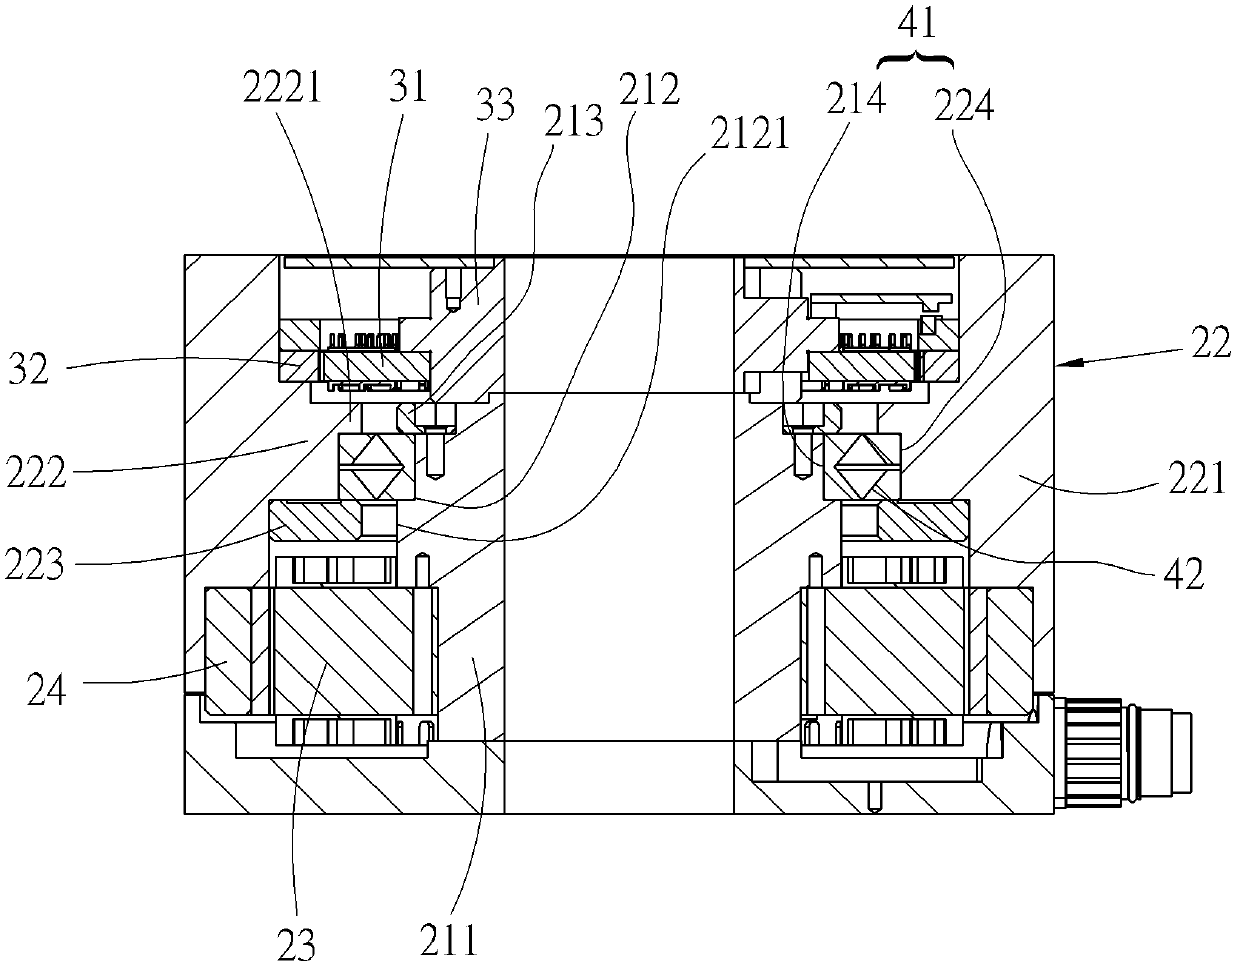 Motor structure provided with resolver